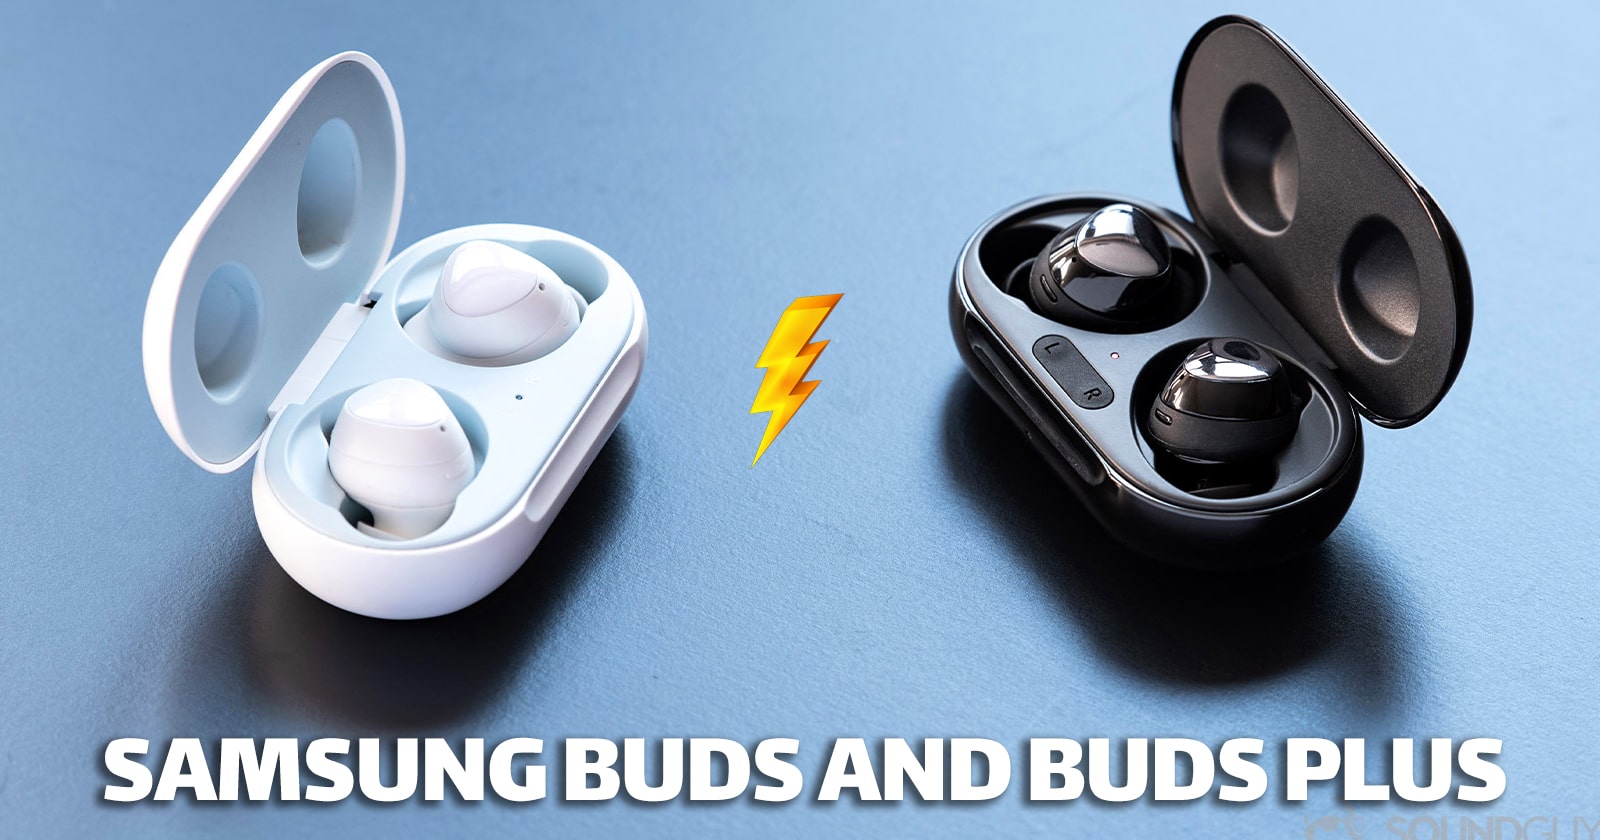 What Is the Difference Between Samsung Buds and Buds Plus